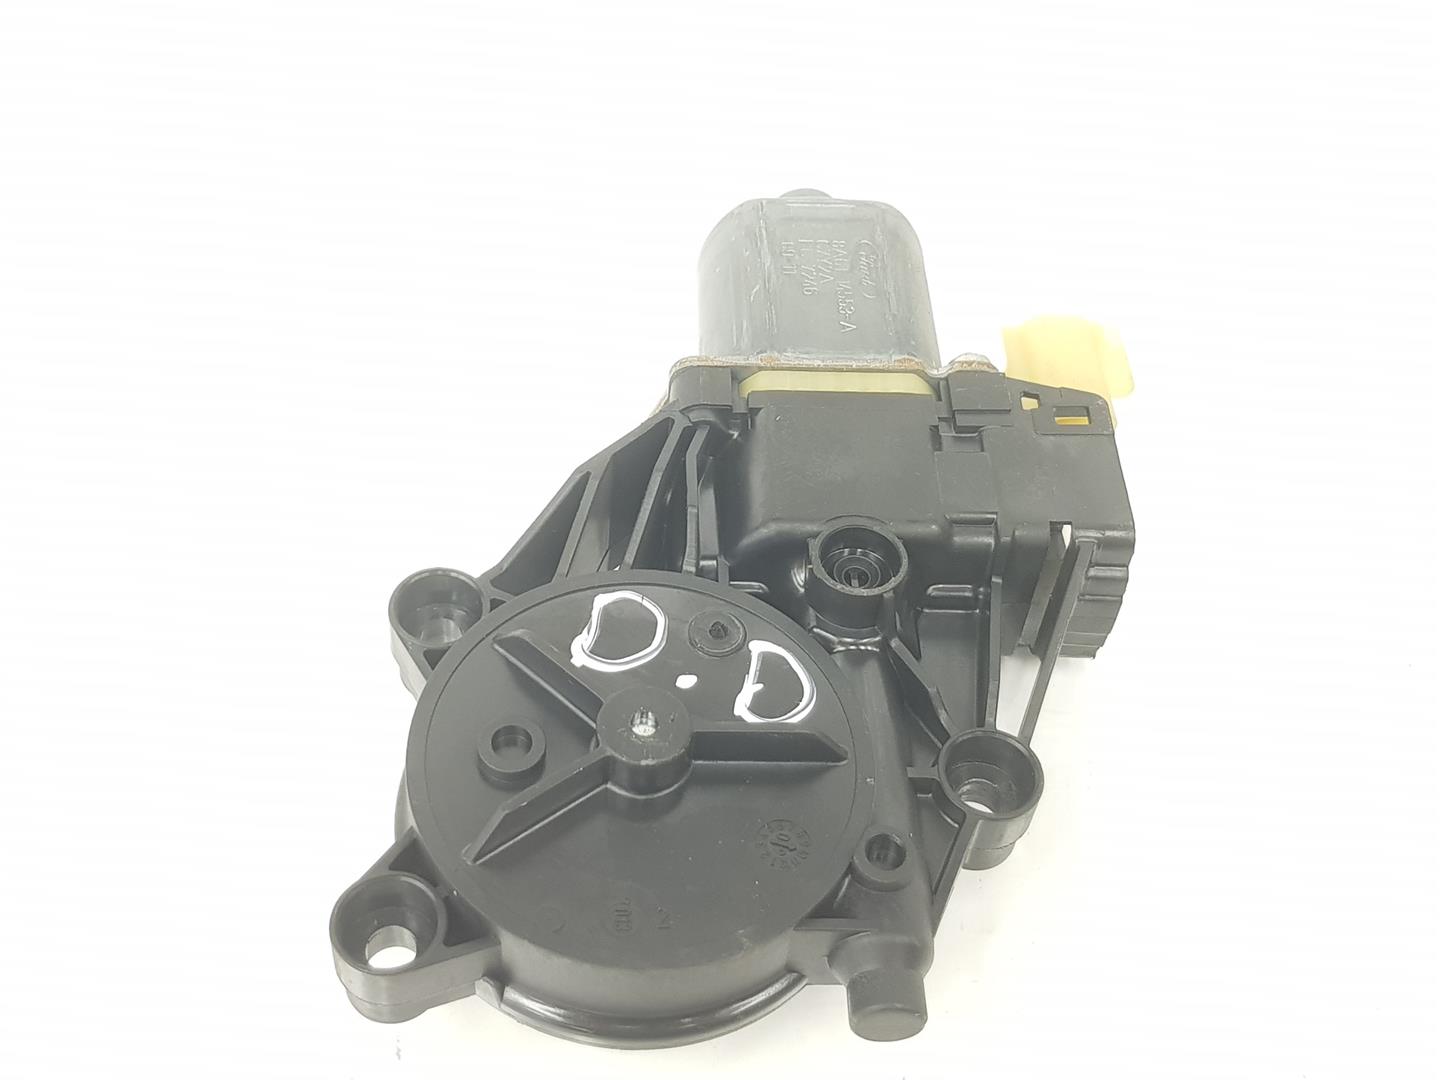 FORD Fiesta 5 generation (2001-2010) Front Right Door Window Control Motor 8A6114553AB, 1543207 25100029